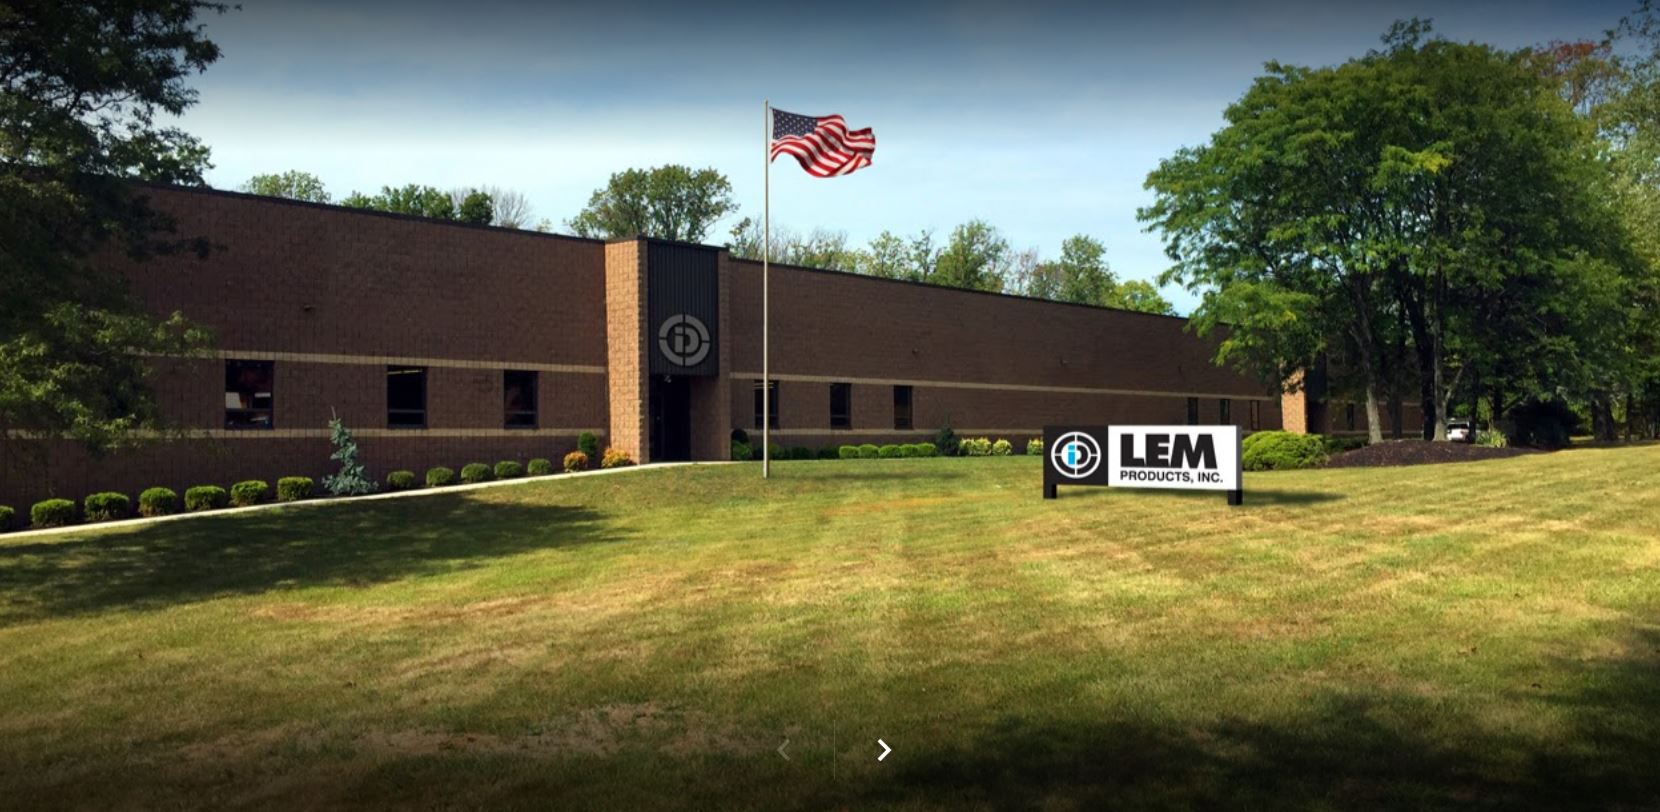 LEM Products, Inc.’s 2021 Charitable Holiday Festivities